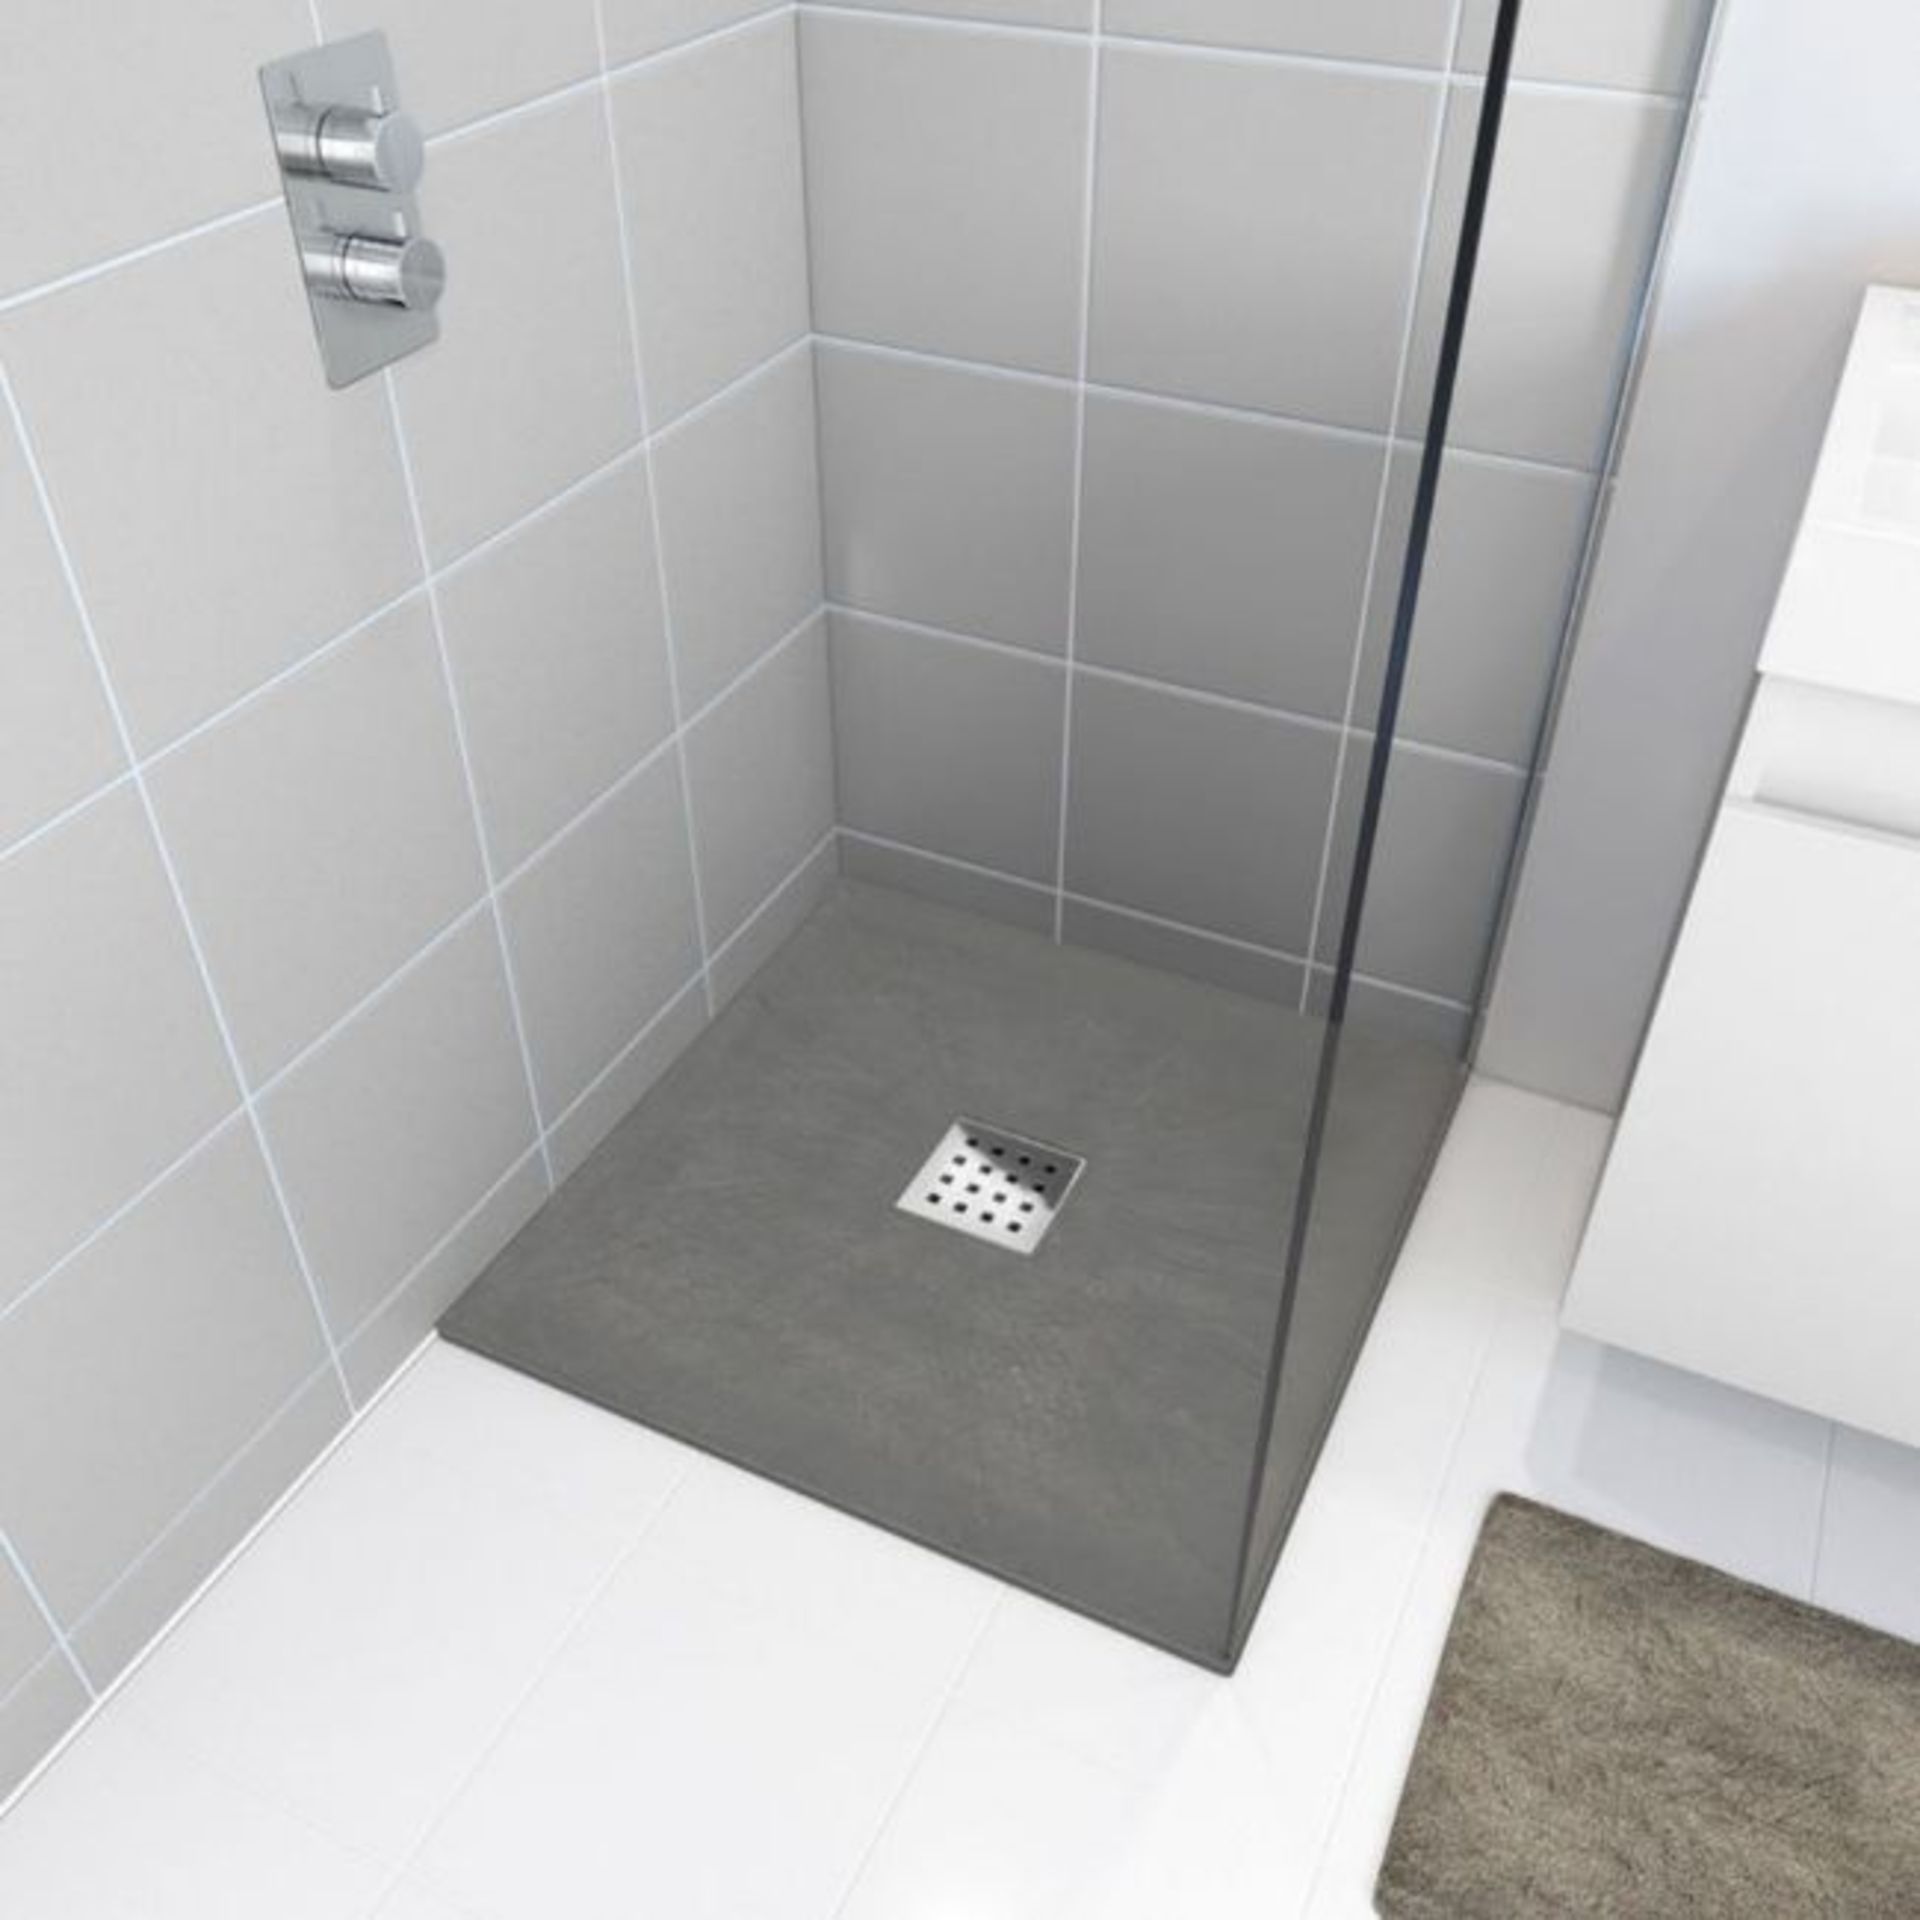 New 900x900 mm Square Slate Effect Shower Tray In Grey. Manufactured In The Uk From High Grade ...